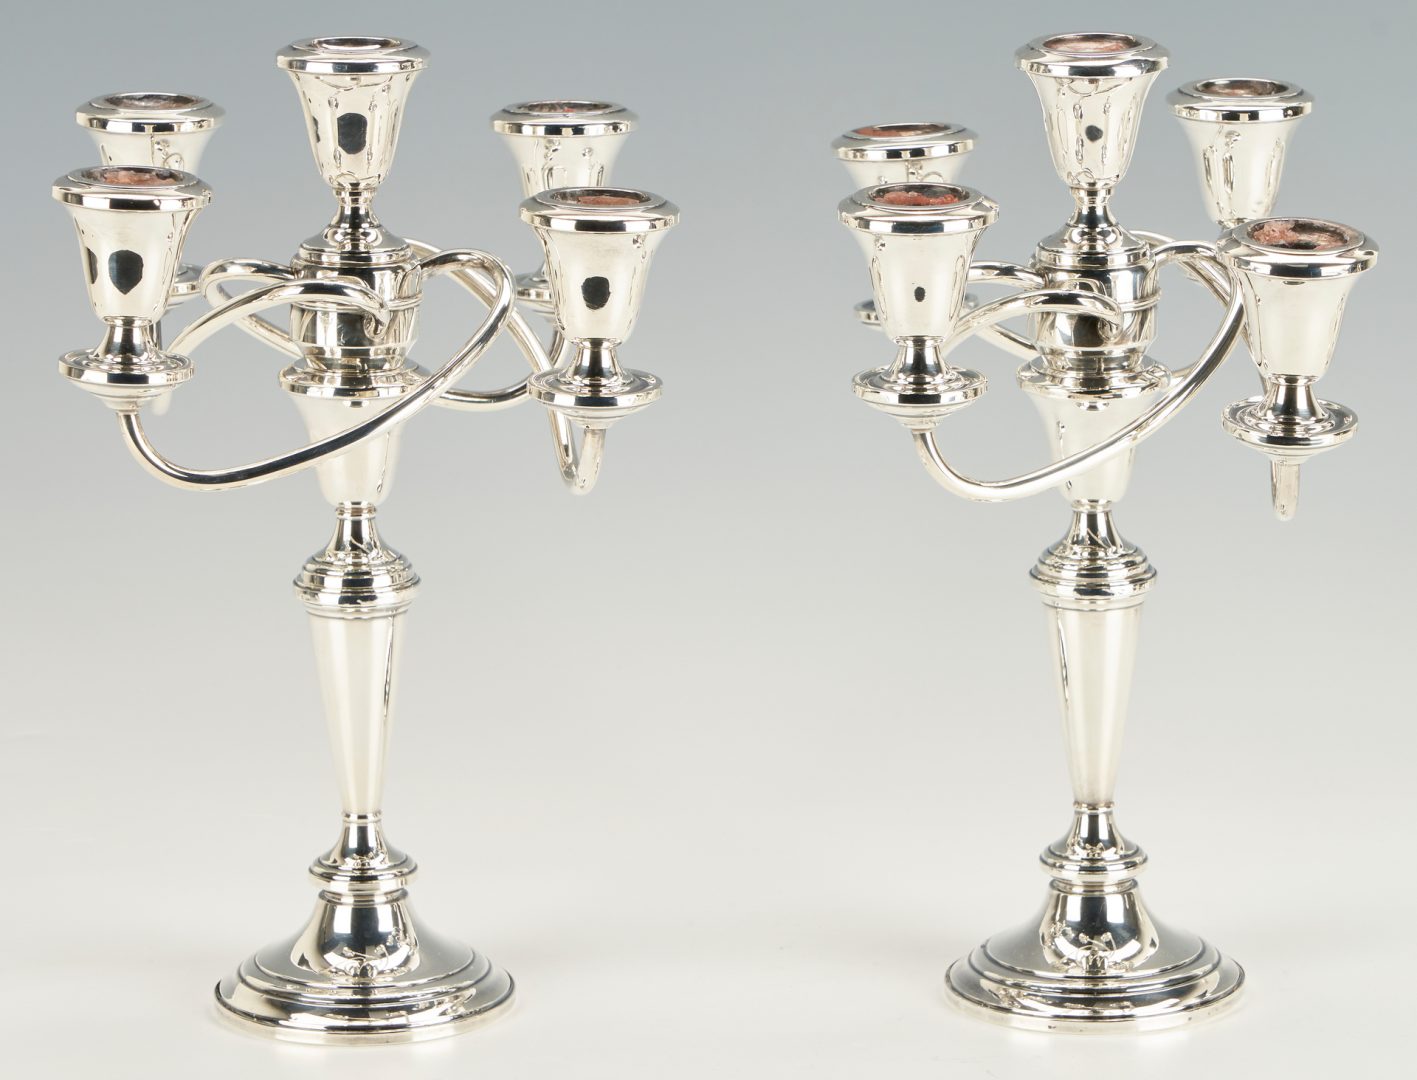 Lot 1259: 12 pc Weighted Sterling Silver, Candelabras, Candlesticks, Compotes